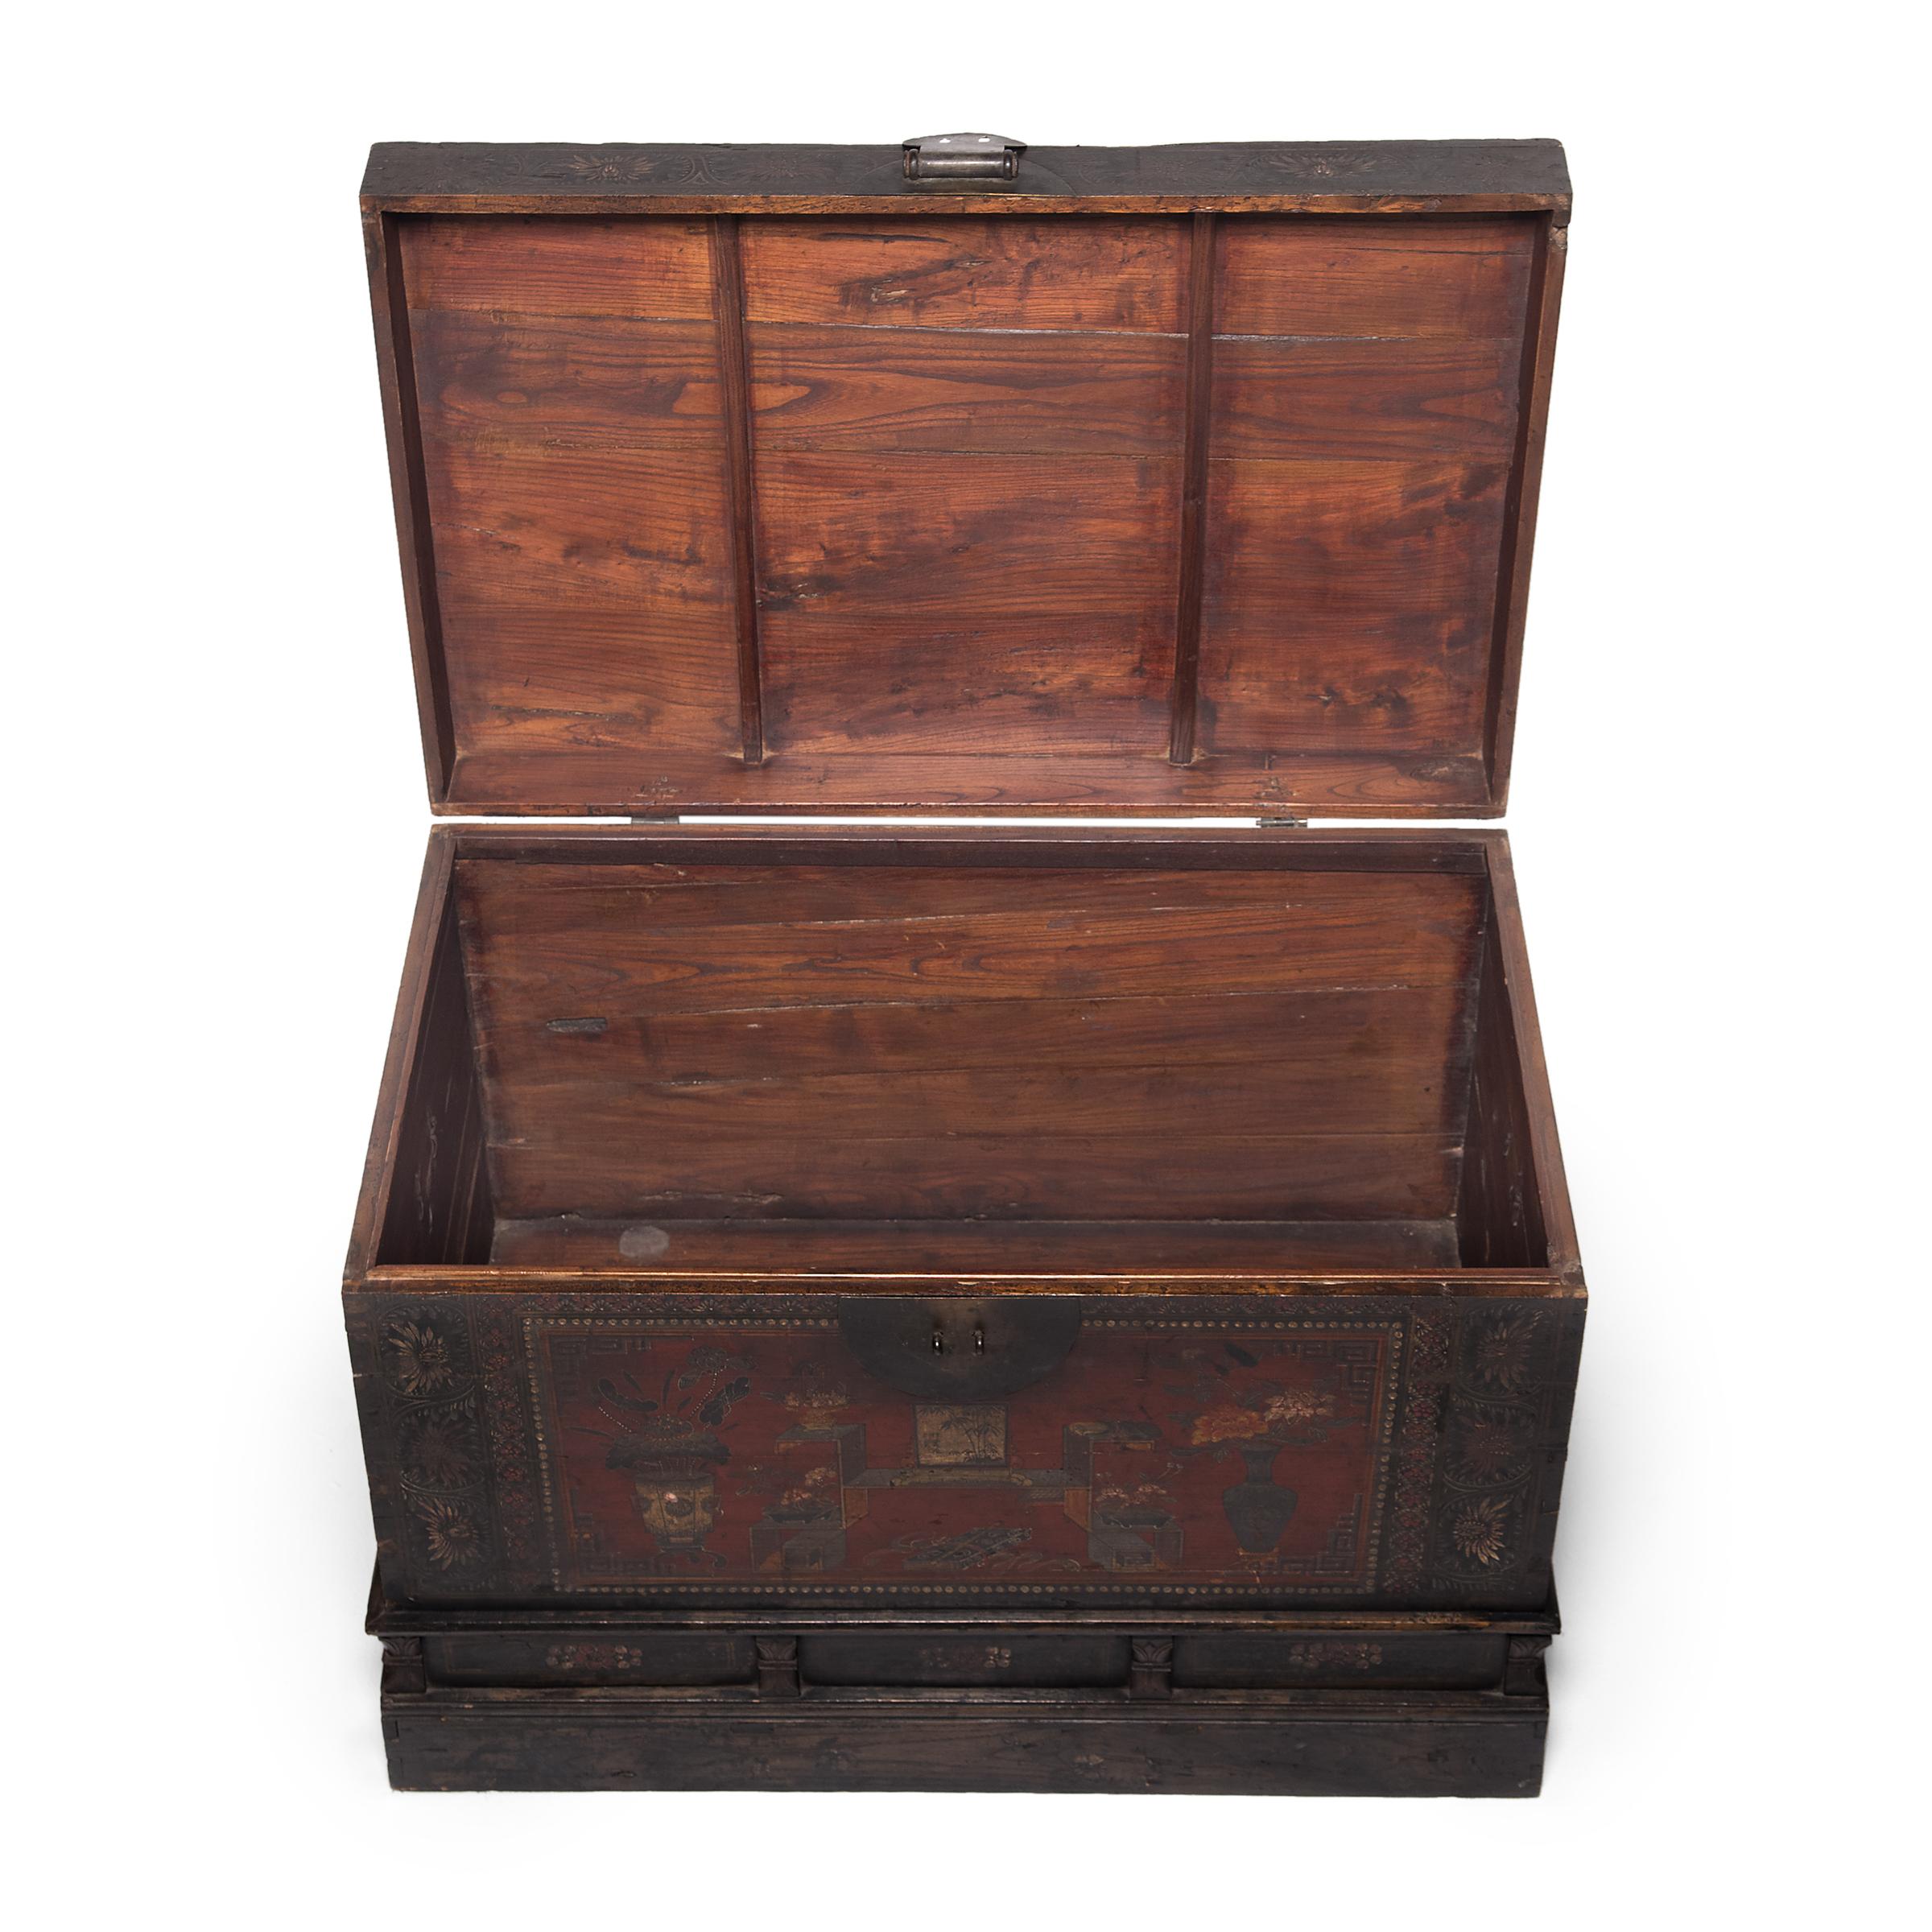 Elm Chinese Painted Book Chest, c. 1850